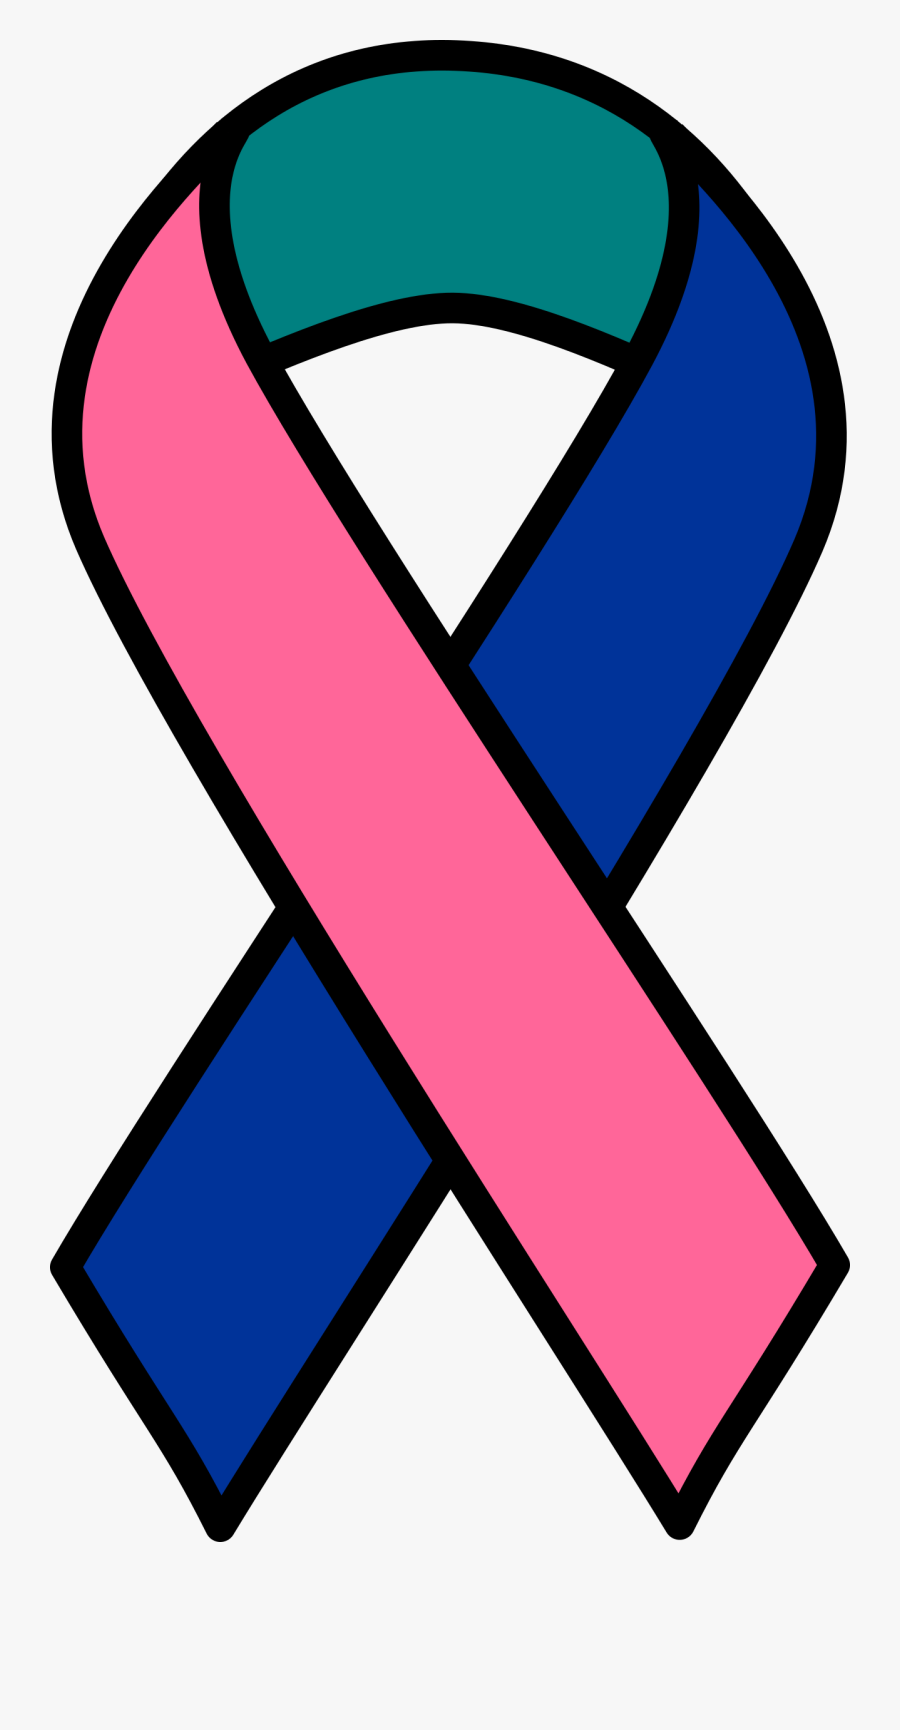 This Free Icons Png Design Of Thyroid Cancer Ribbon - Clip Art Breast Cancer Ribbon, Transparent Clipart